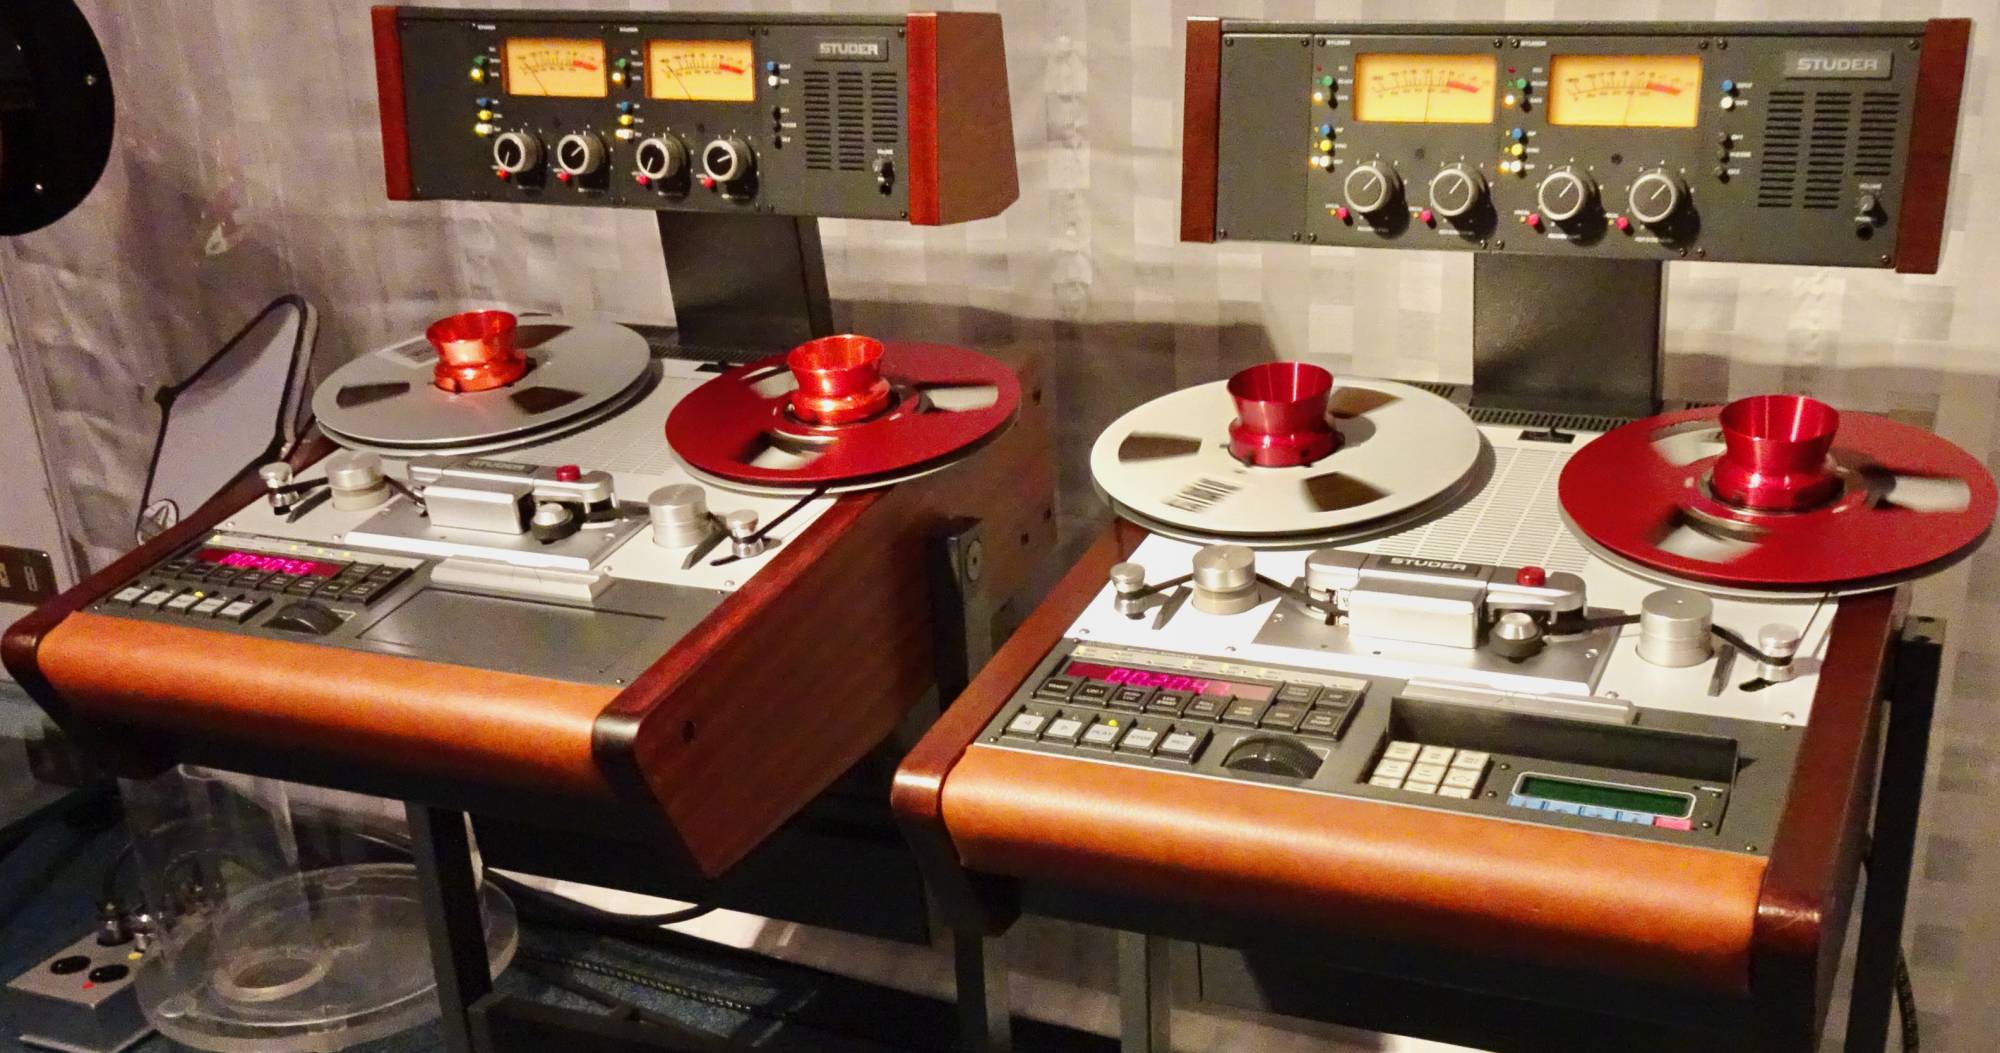 Studer A812 - Professional Reel to Reel Tape Recorder - A stunning pair of  twin machines now available!